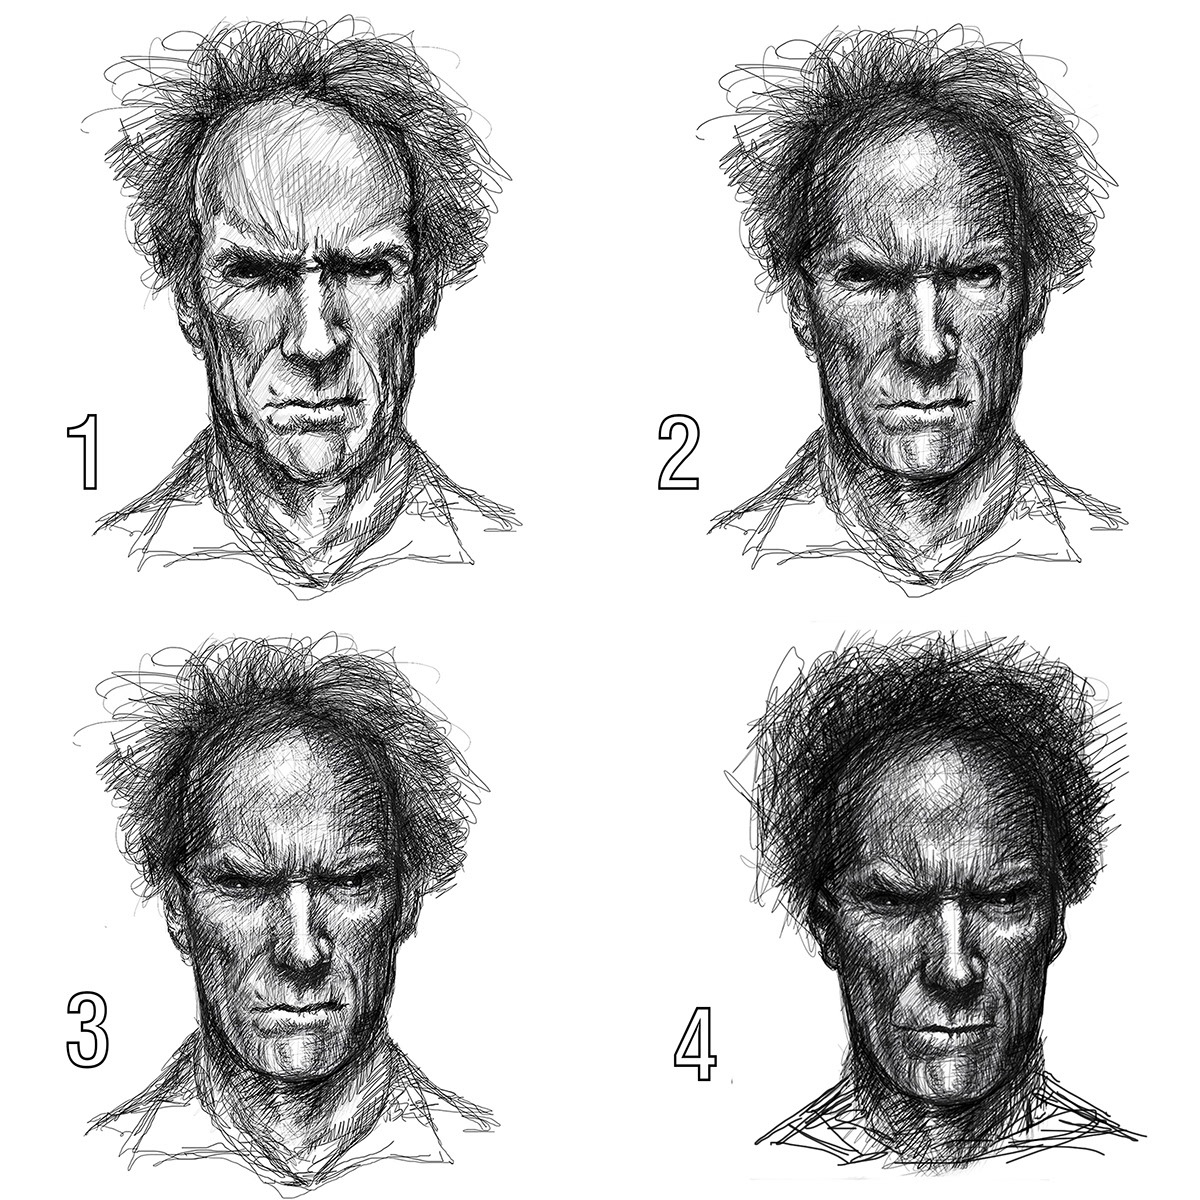 Clint Eastwood goaheadmakemyday Fun Character DirtyHarry angry